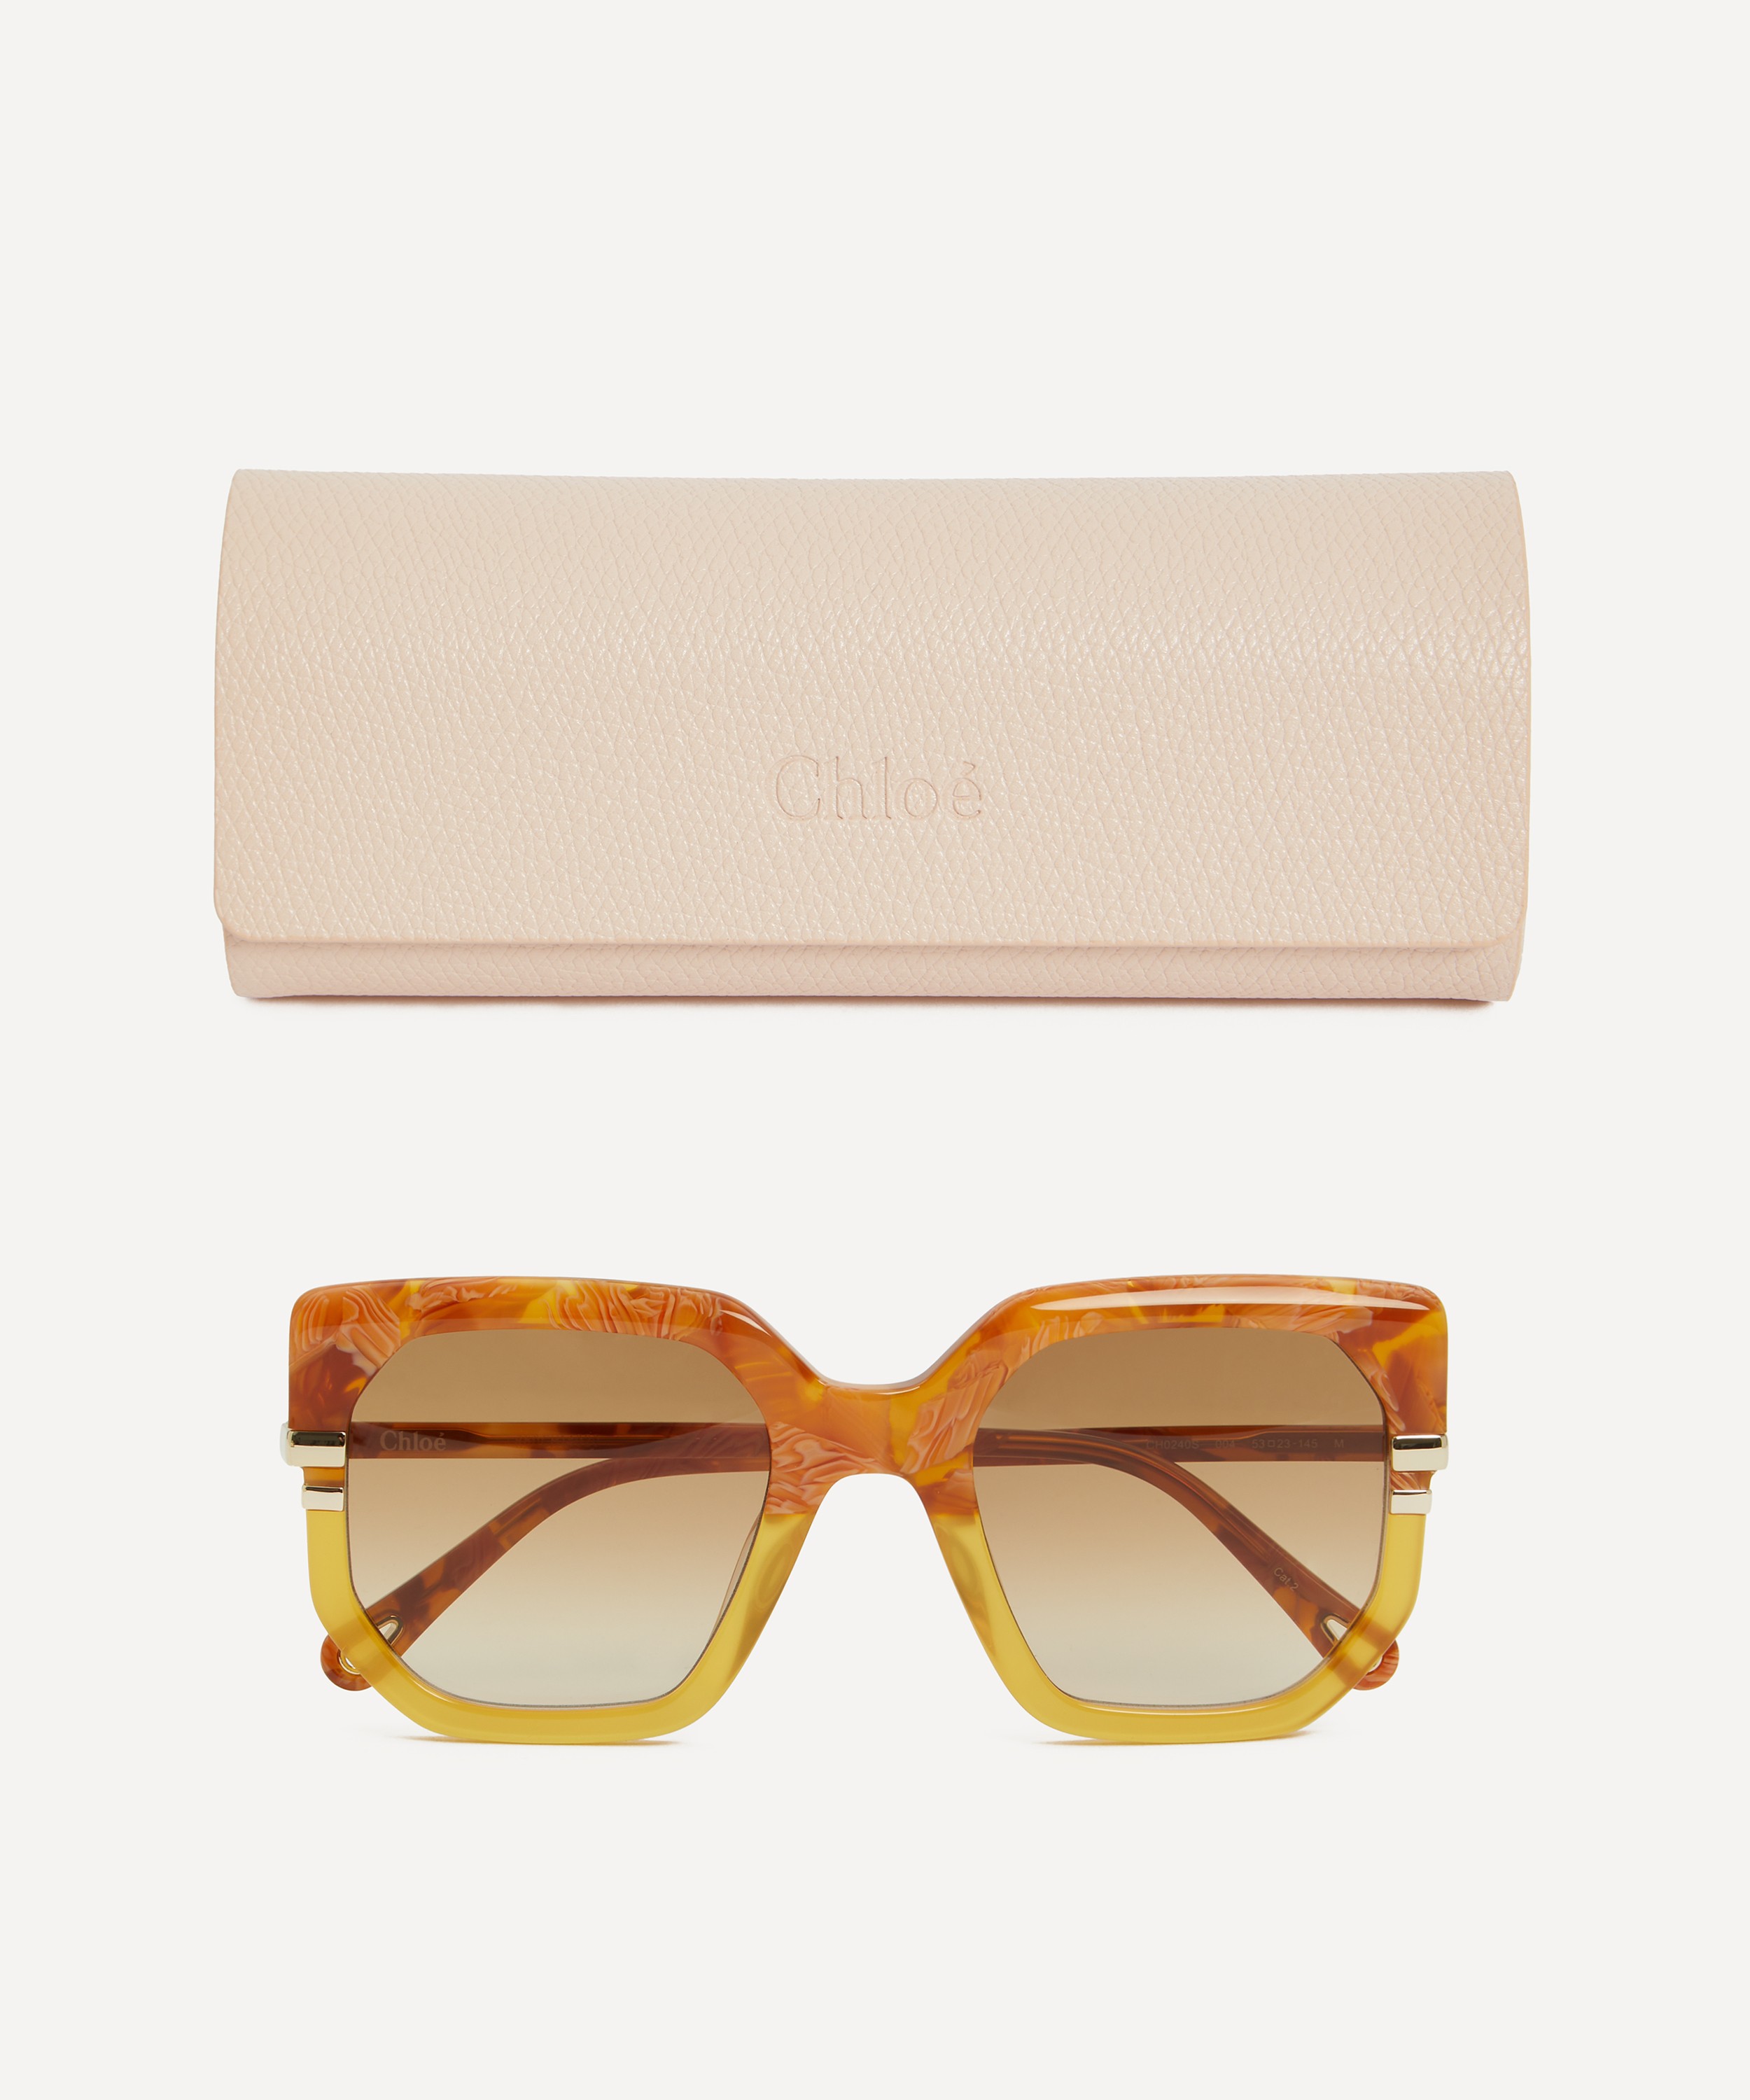 Chloé - Oversized Square Sunglasses image number 3